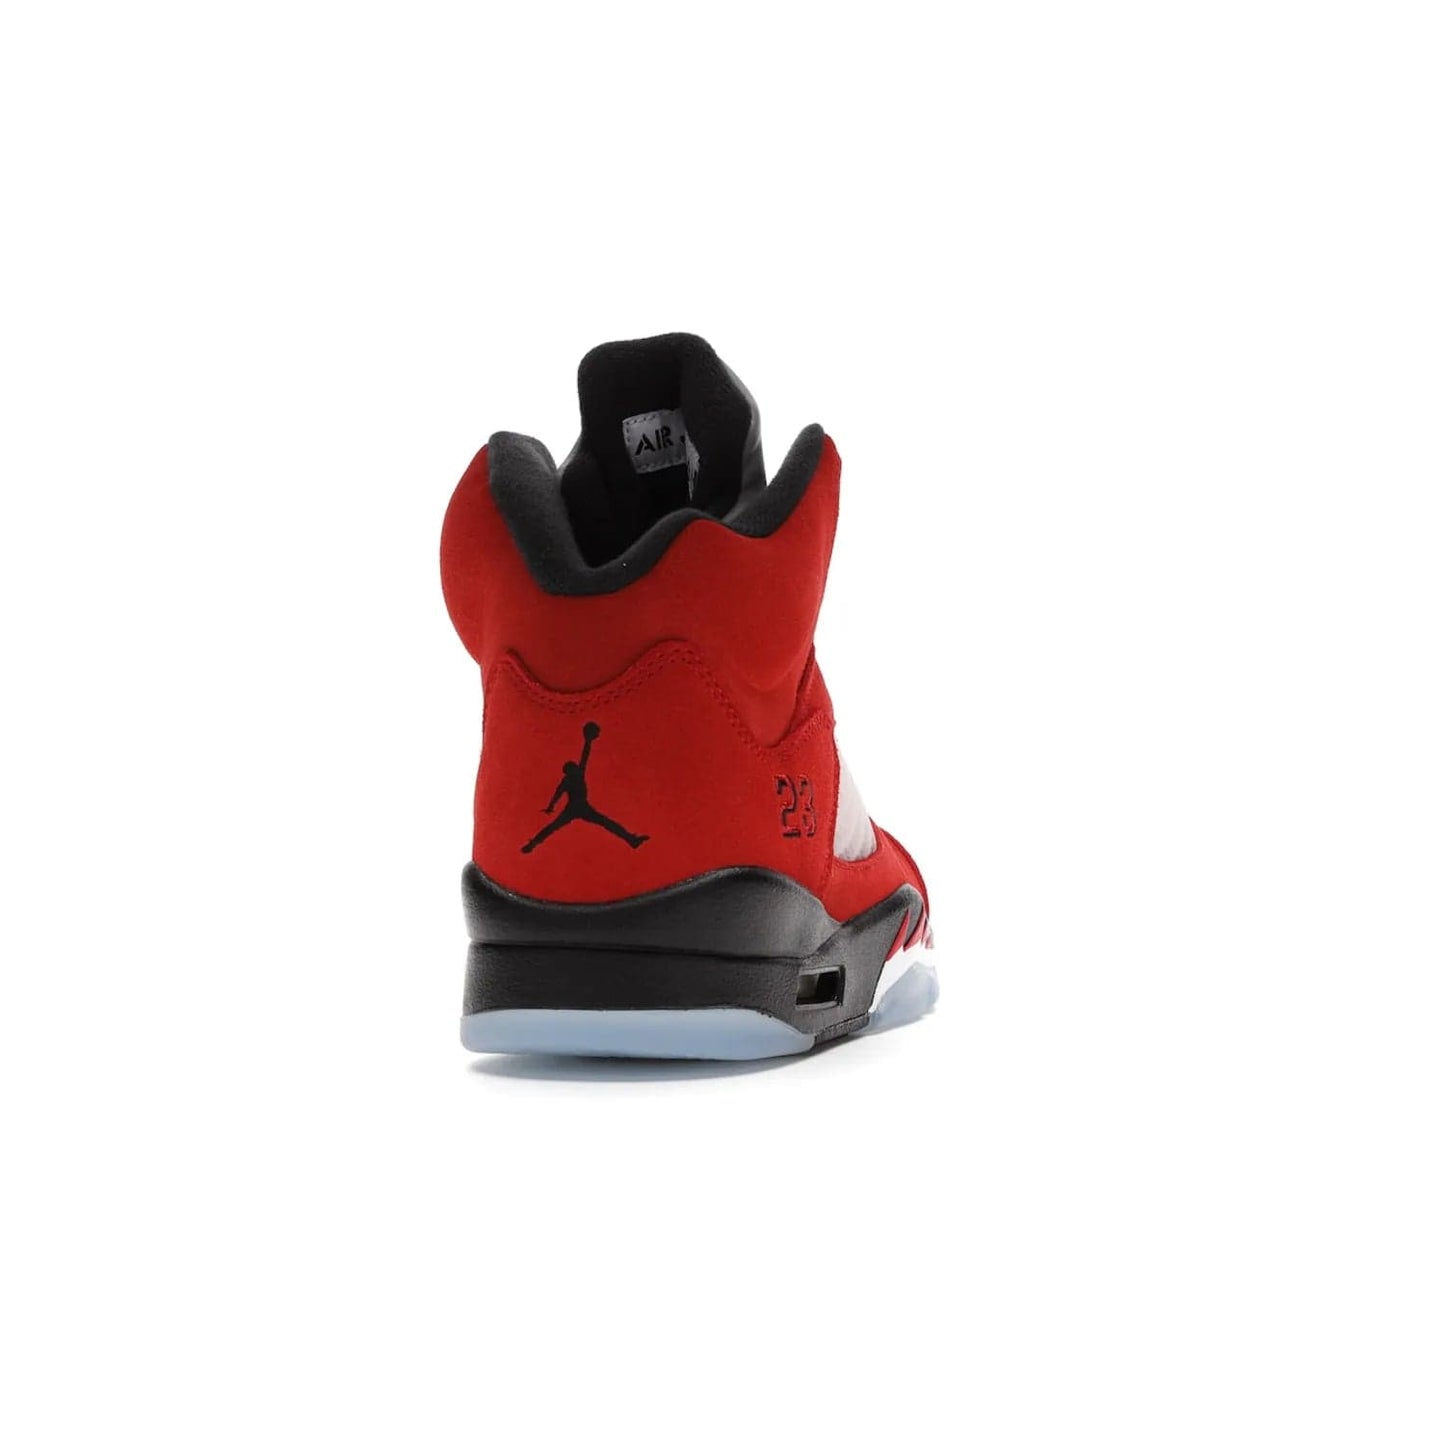 Jordan 5 Retro Raging Bull Red (2021) - Image 29 - Only at www.BallersClubKickz.com - Get ready for the 2021 stand-alone release of the Air Jordan 5 Raging Bulls! This all-suede upper combines luxe details like a Jumpman logo, red & black "23" embroidery and shark tooth detailing, atop a black midsole. Don't miss out - release date in April 2021 for $190.